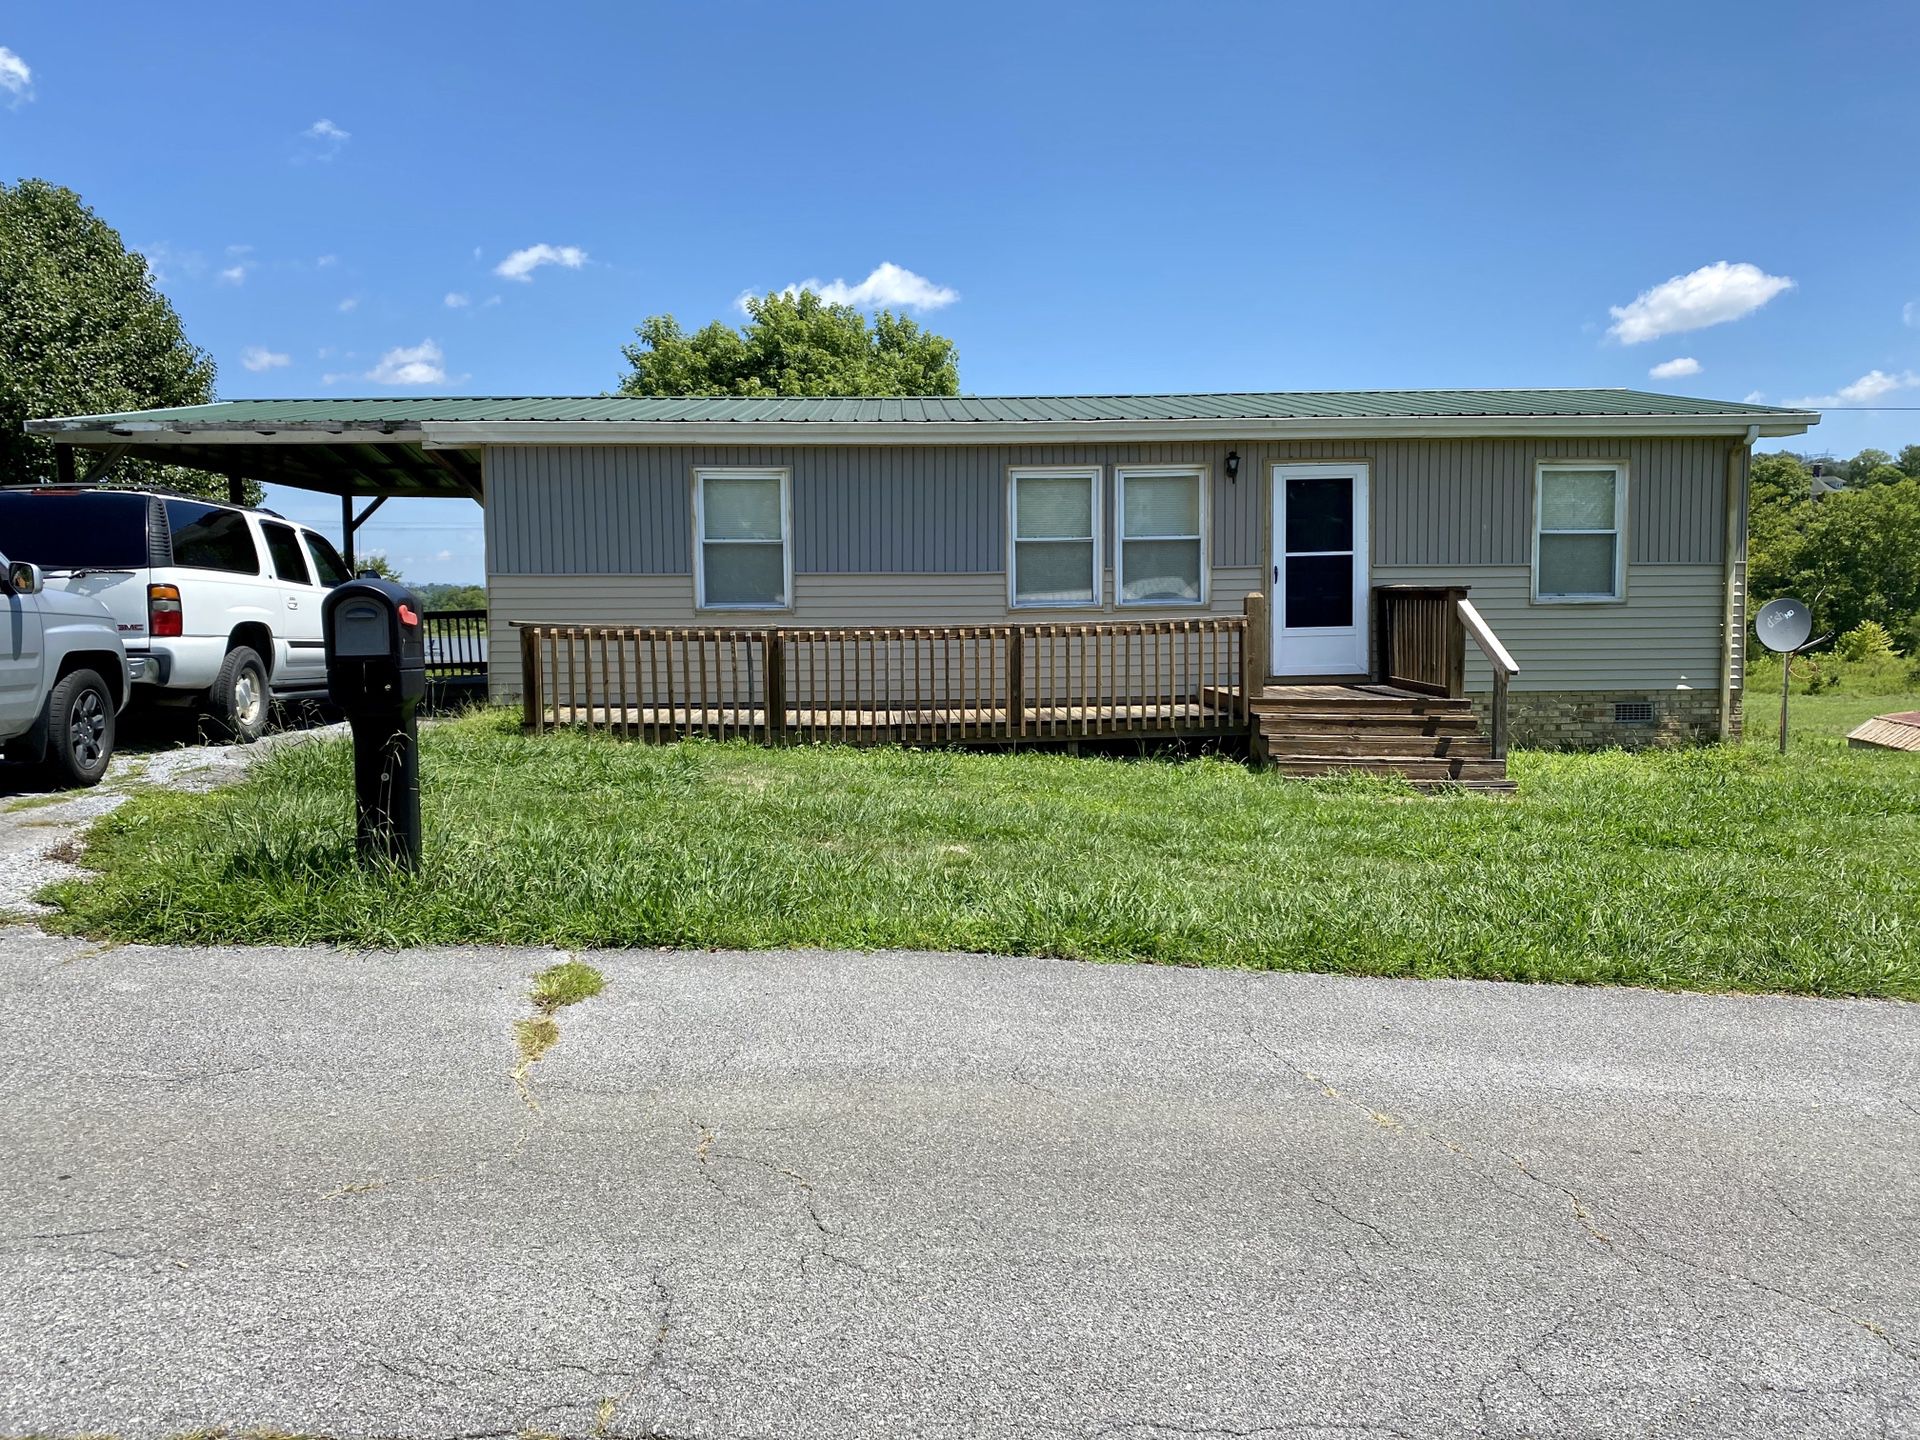 3 bed/2 bath for sale in Kingsport